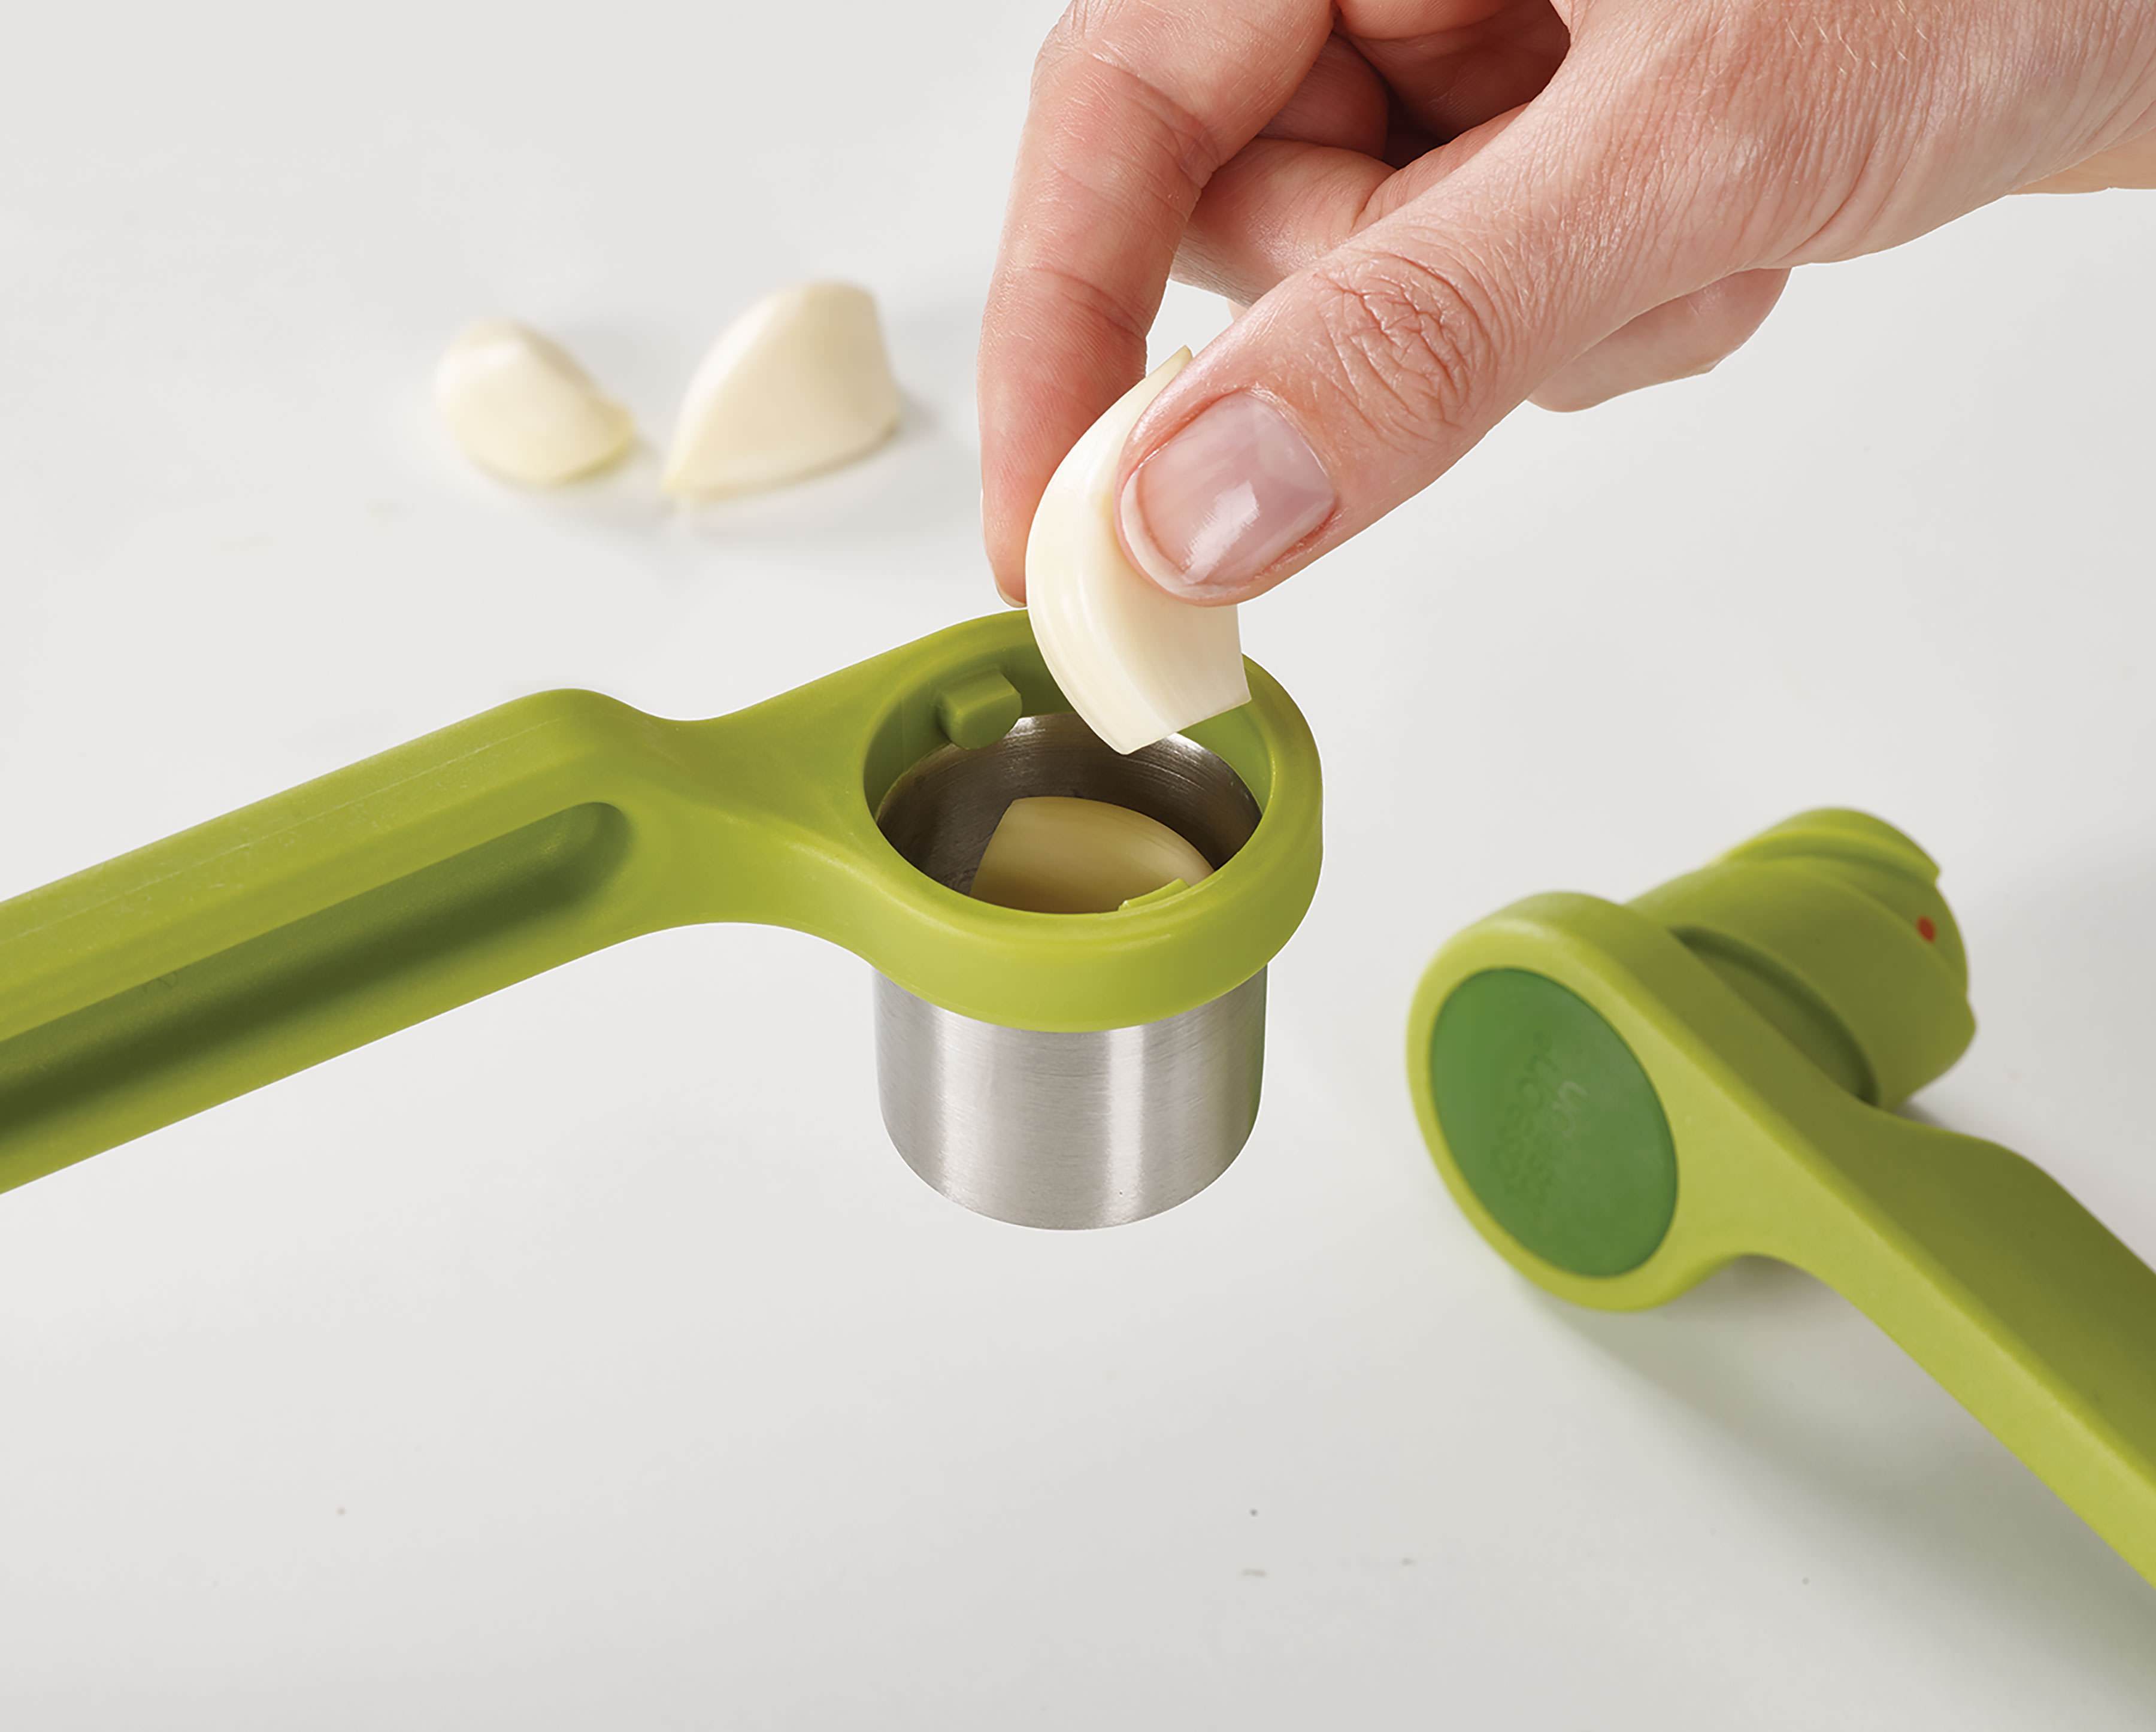 BEON.COM.AU  Make short work of crushing garlic with this easy-to-use garlic press, its unique twisting mechanism allows you to press with more power from less effort.  Unique twisting action makes crushing easier Crush multiple garlic cloves at once Durable stainless-steel and nylon construction Easy-clean ... Joseph Joseph at BEON.COM.AU